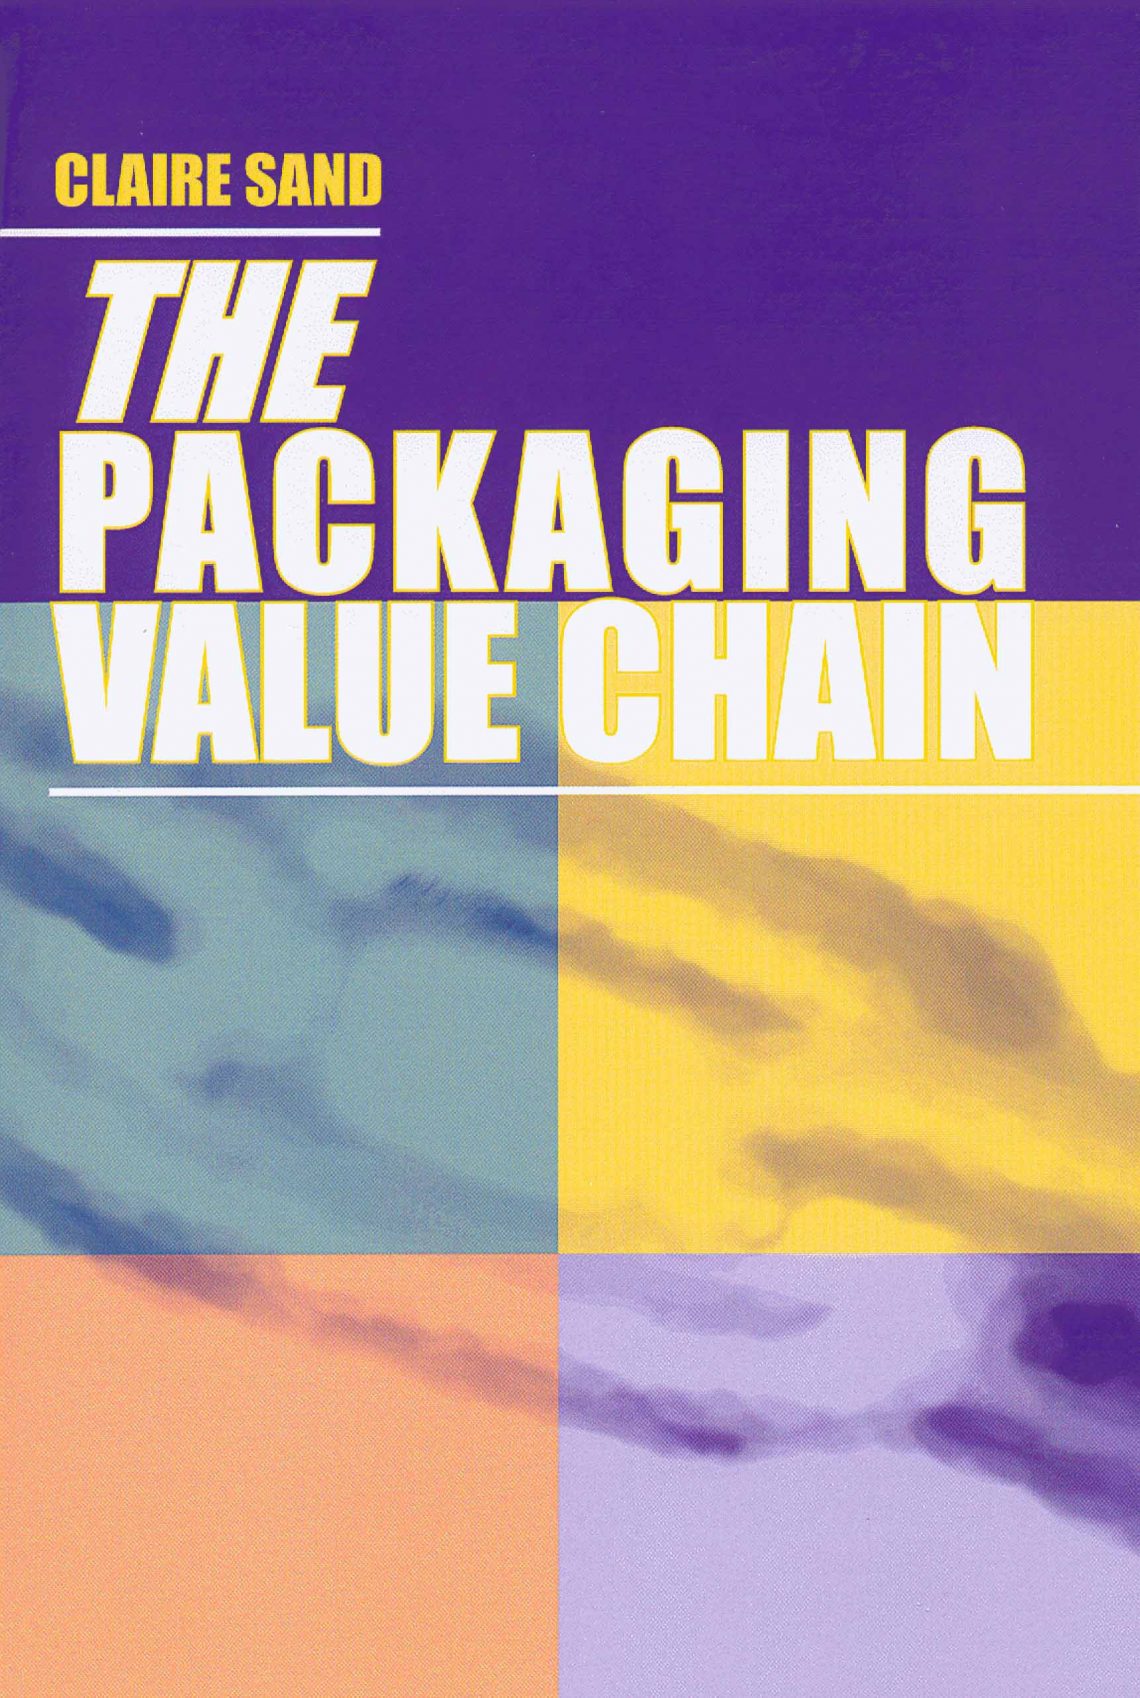 The packaging value chain